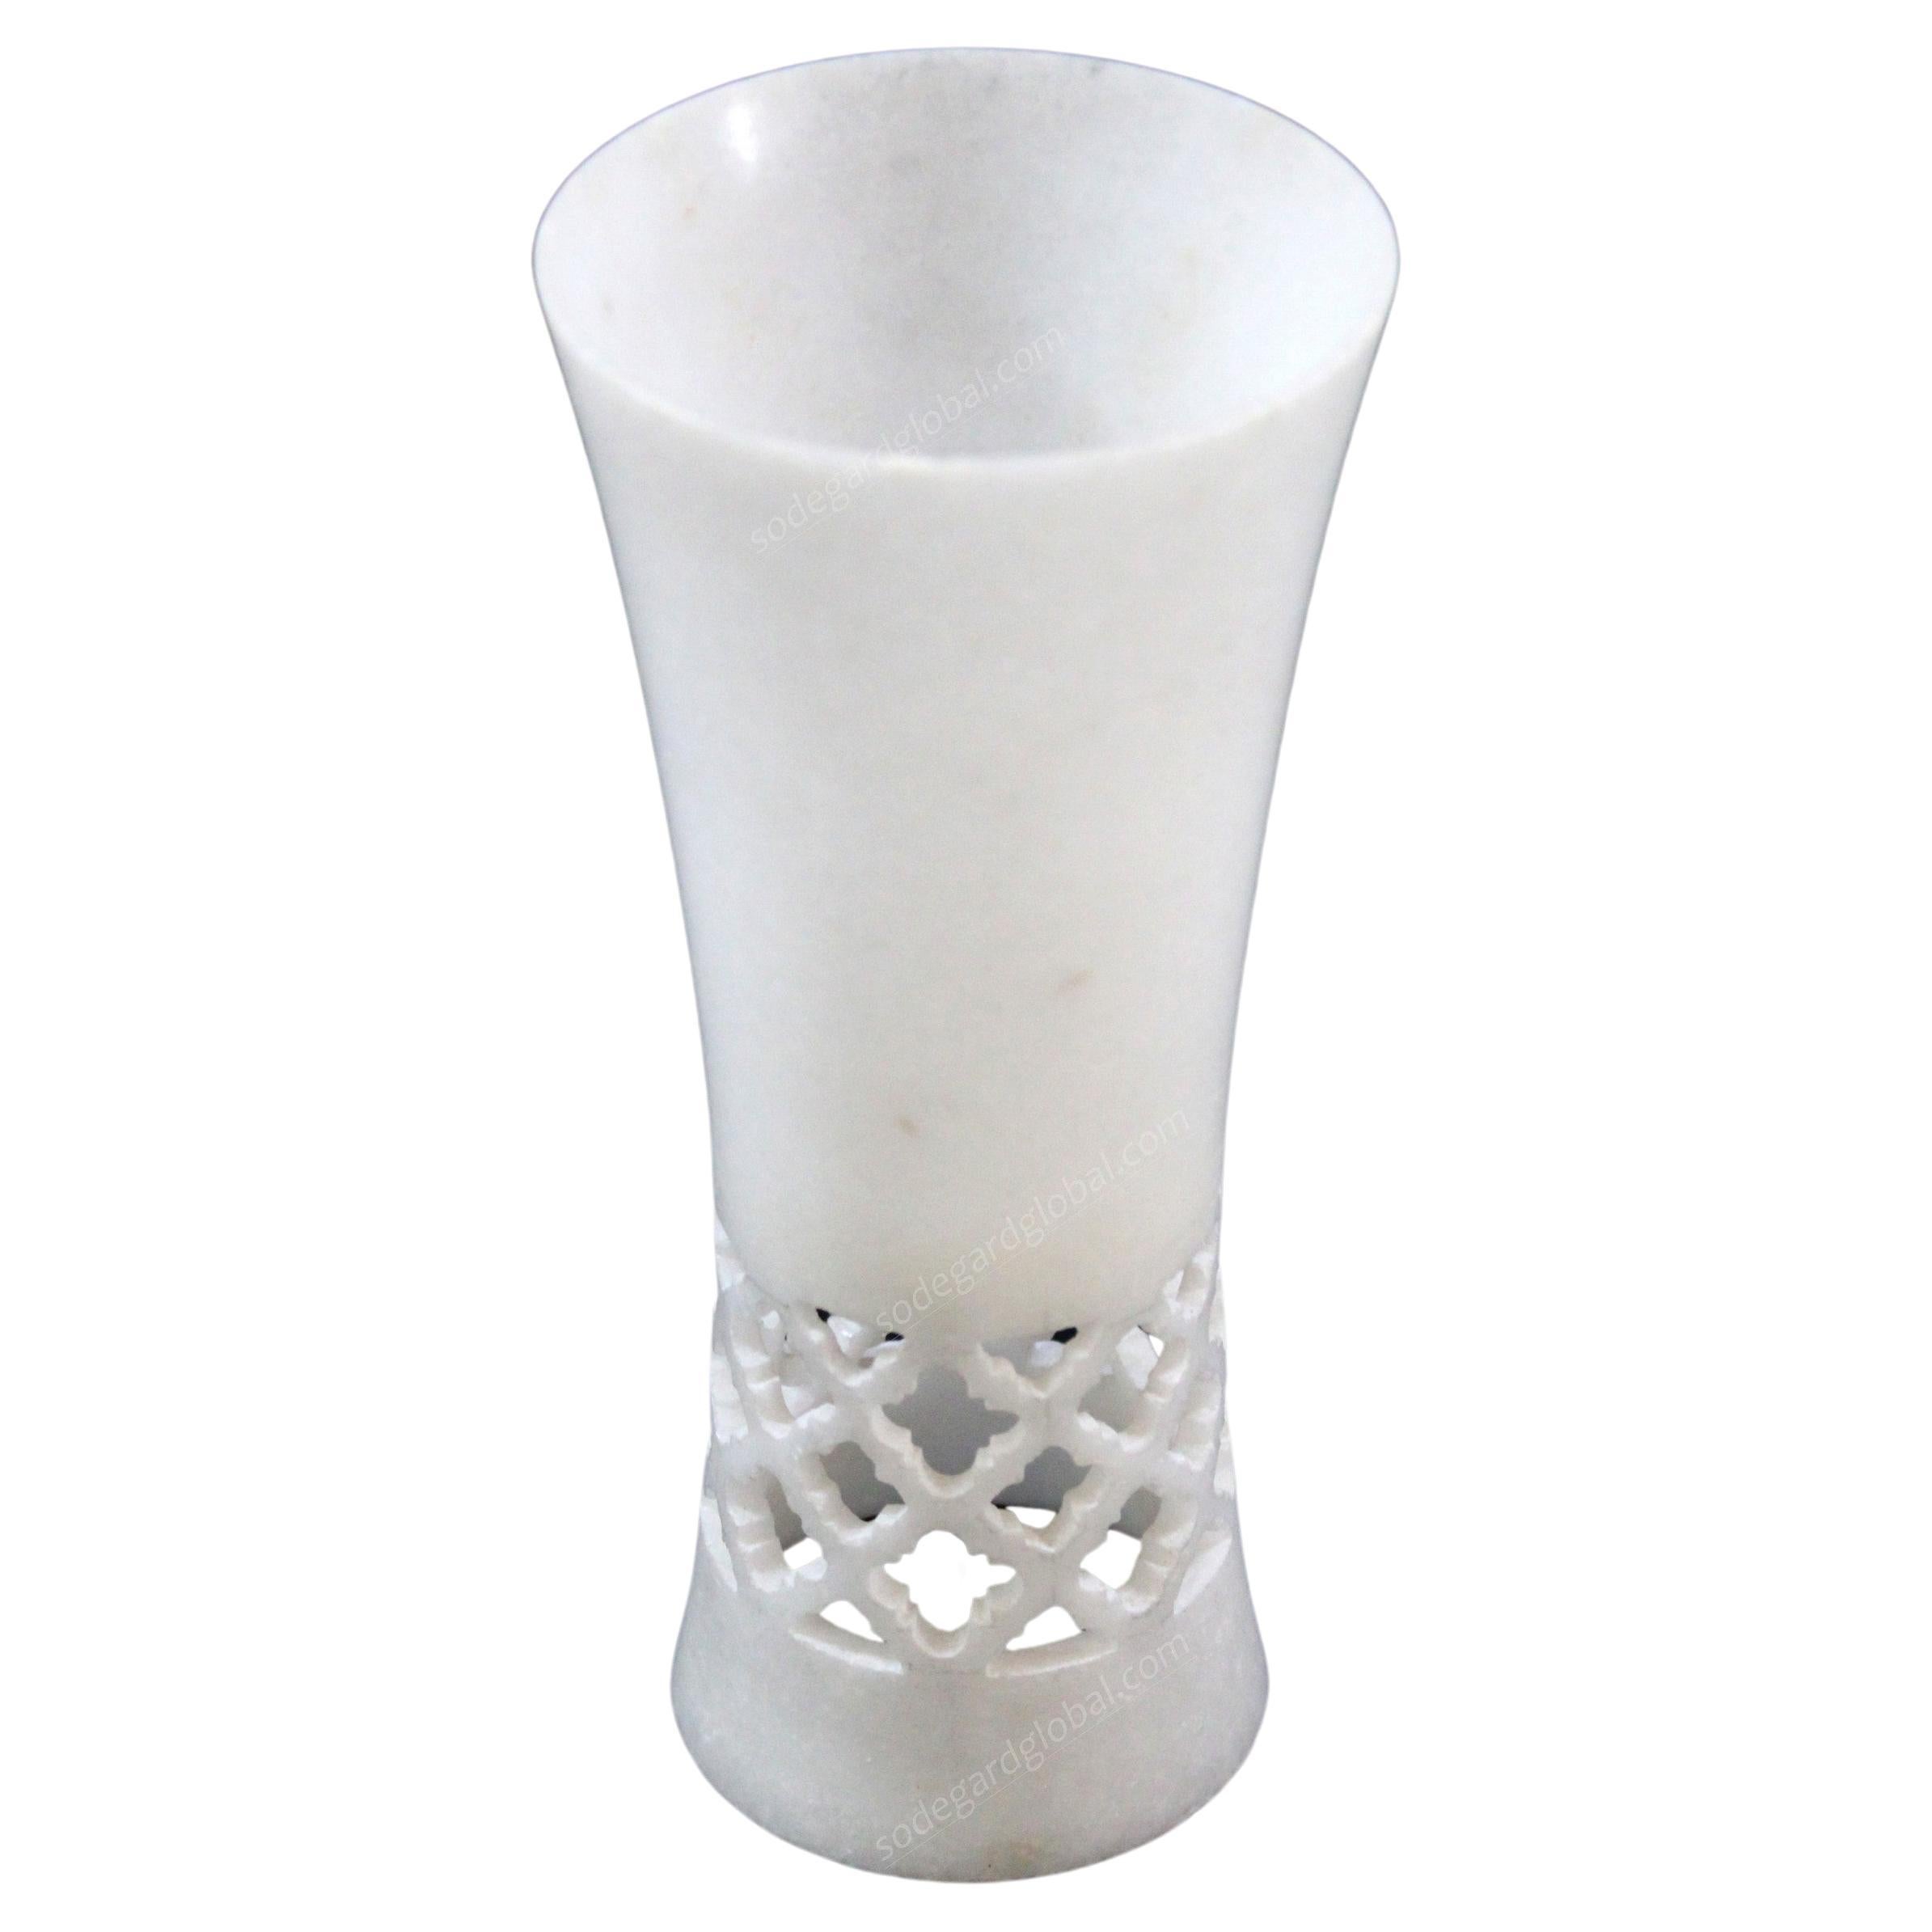 Goblet in White Marble Handctafted in India by Stephanie Odegard